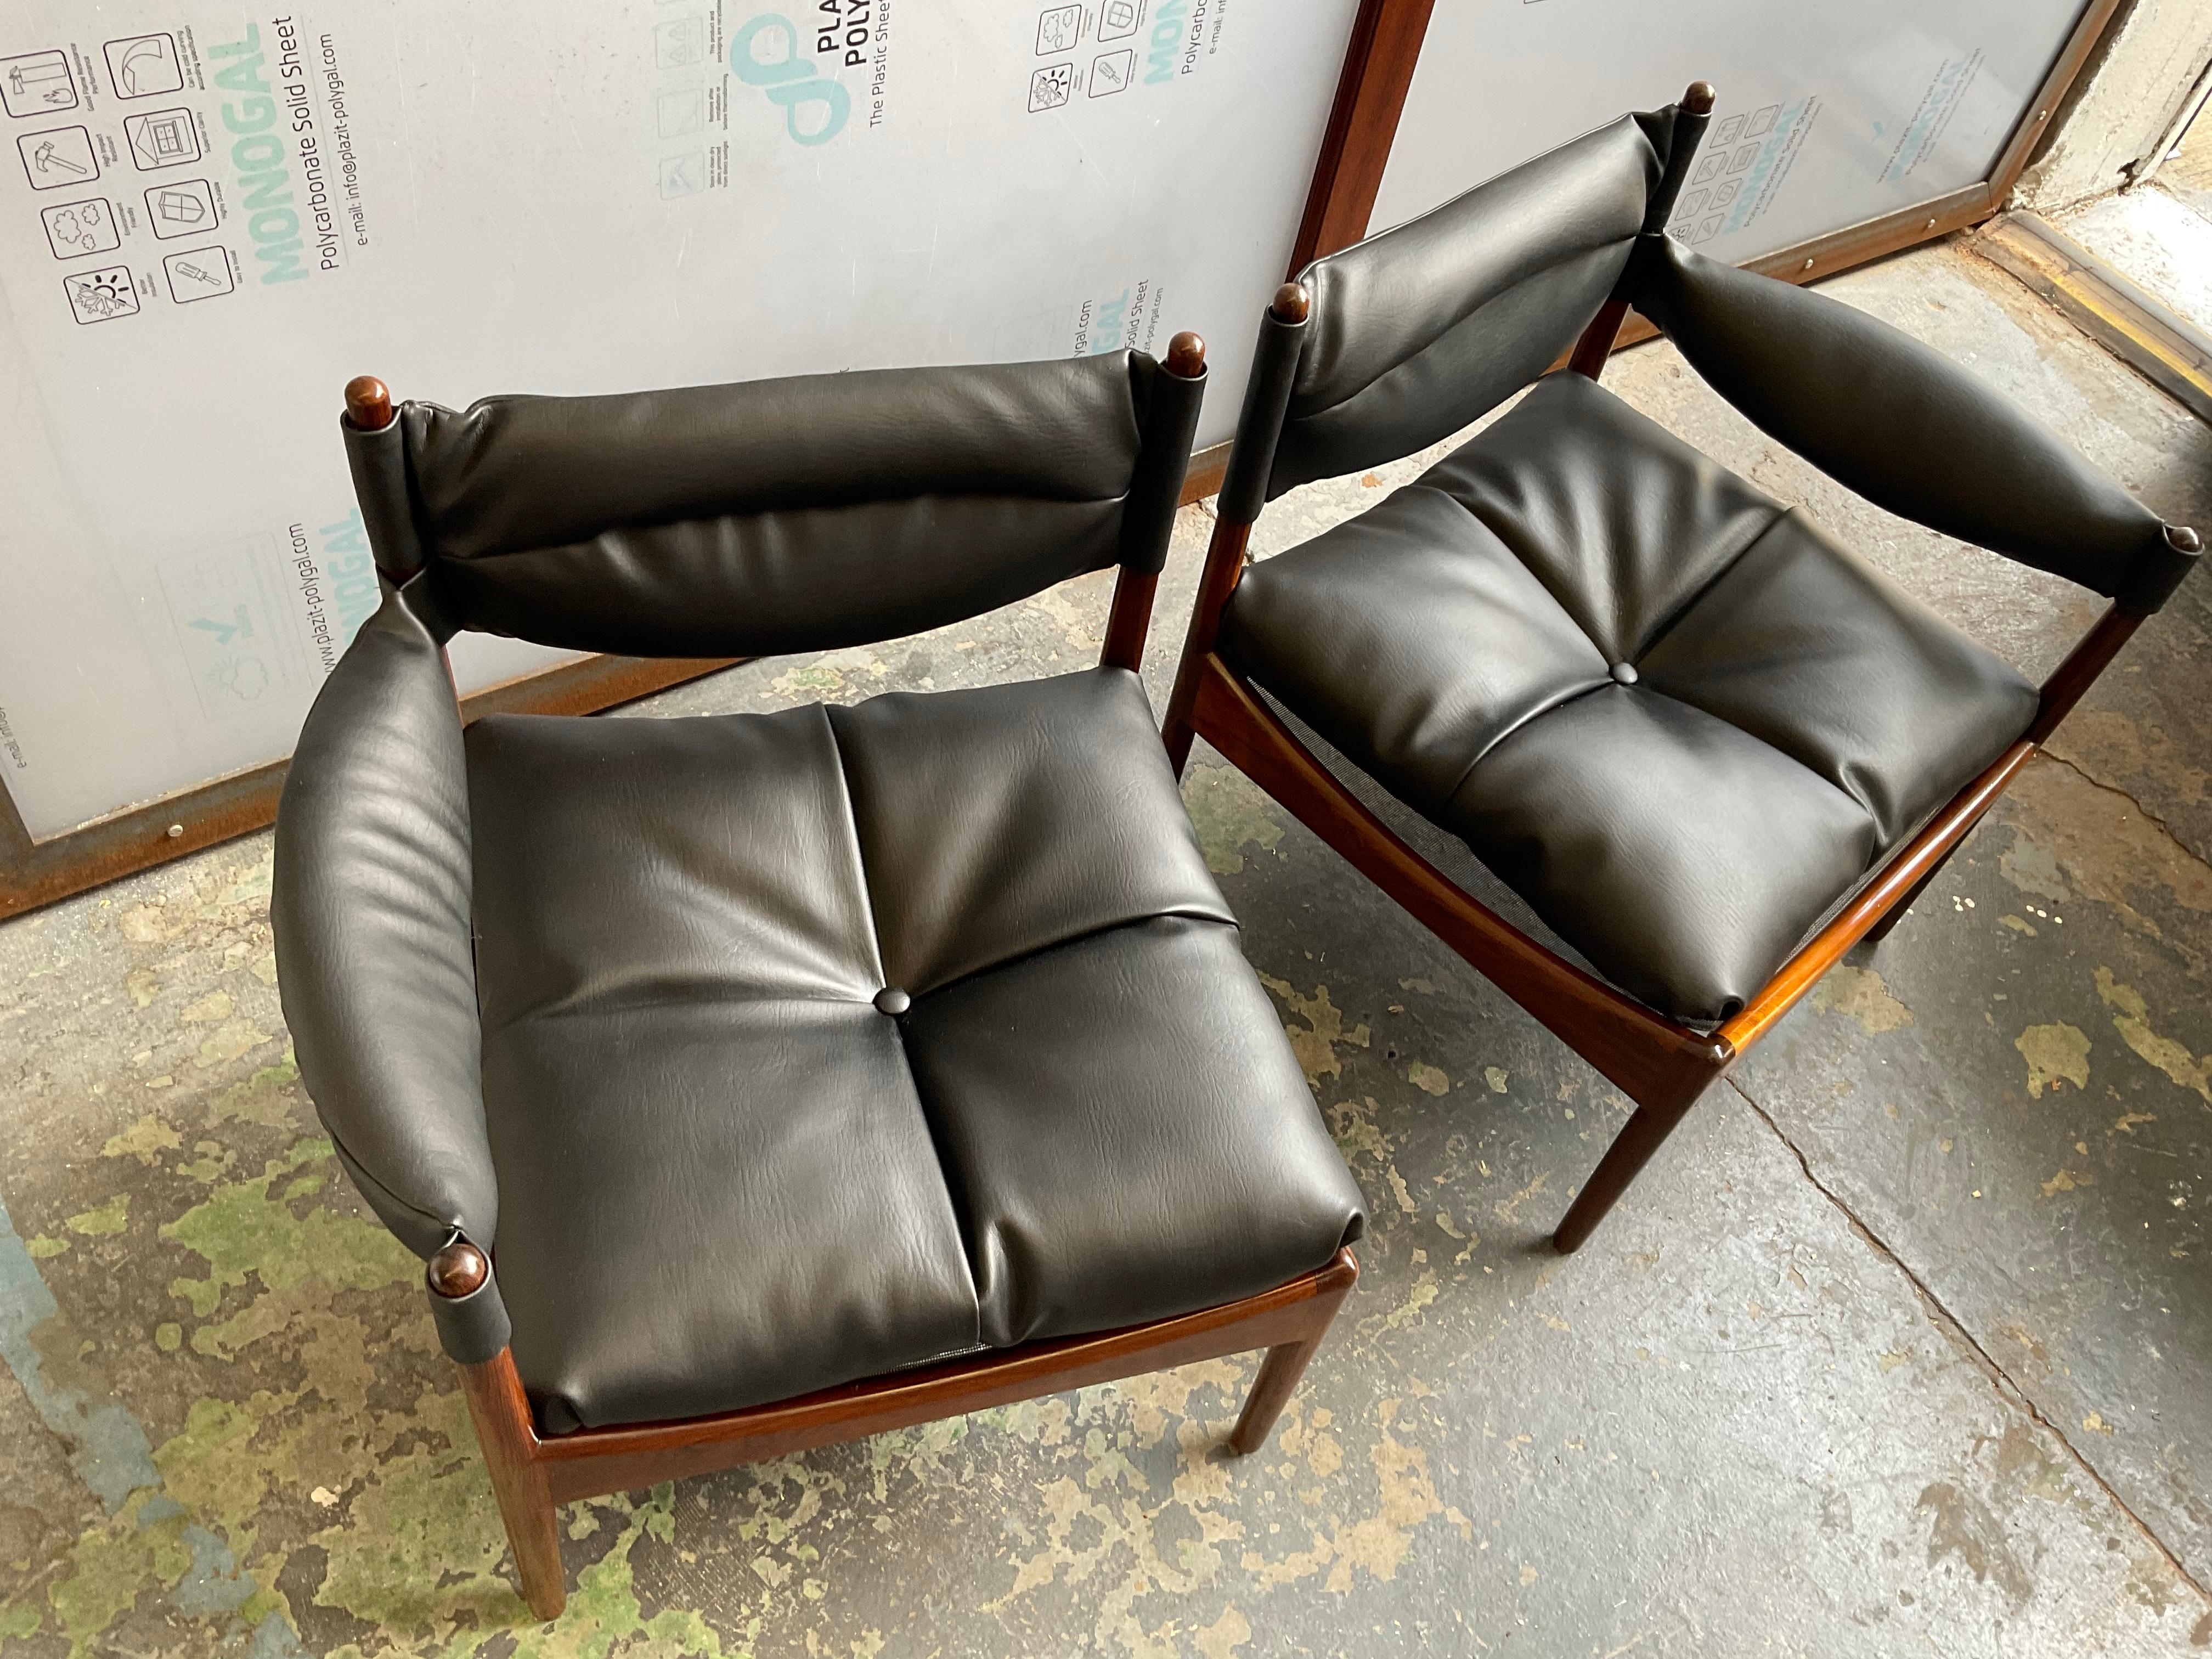 Kristian Solmer Vedel “Modus” Settee, Tropical Wood & Leather, 1963 For Sale 6